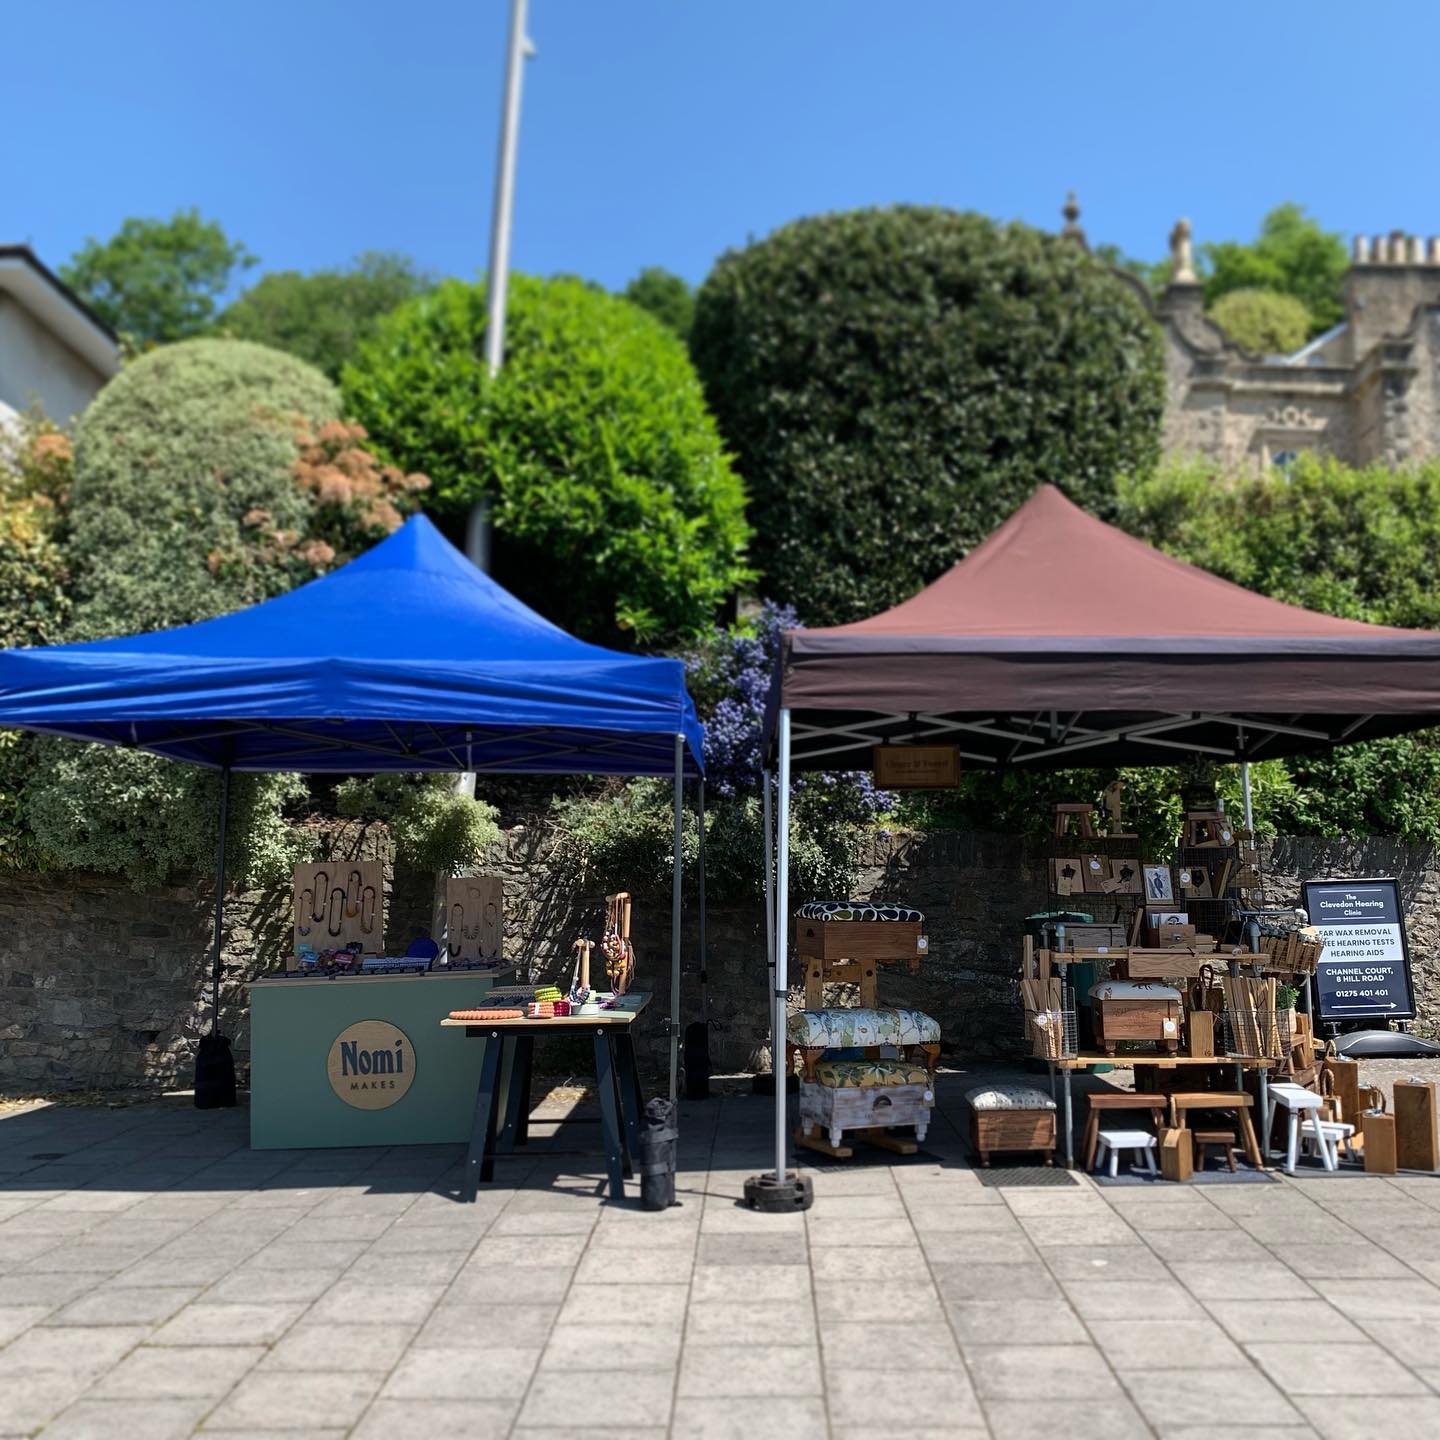 Beautiful day here in Clevedon! Always a pleasure @clevedonsundaymarket ️